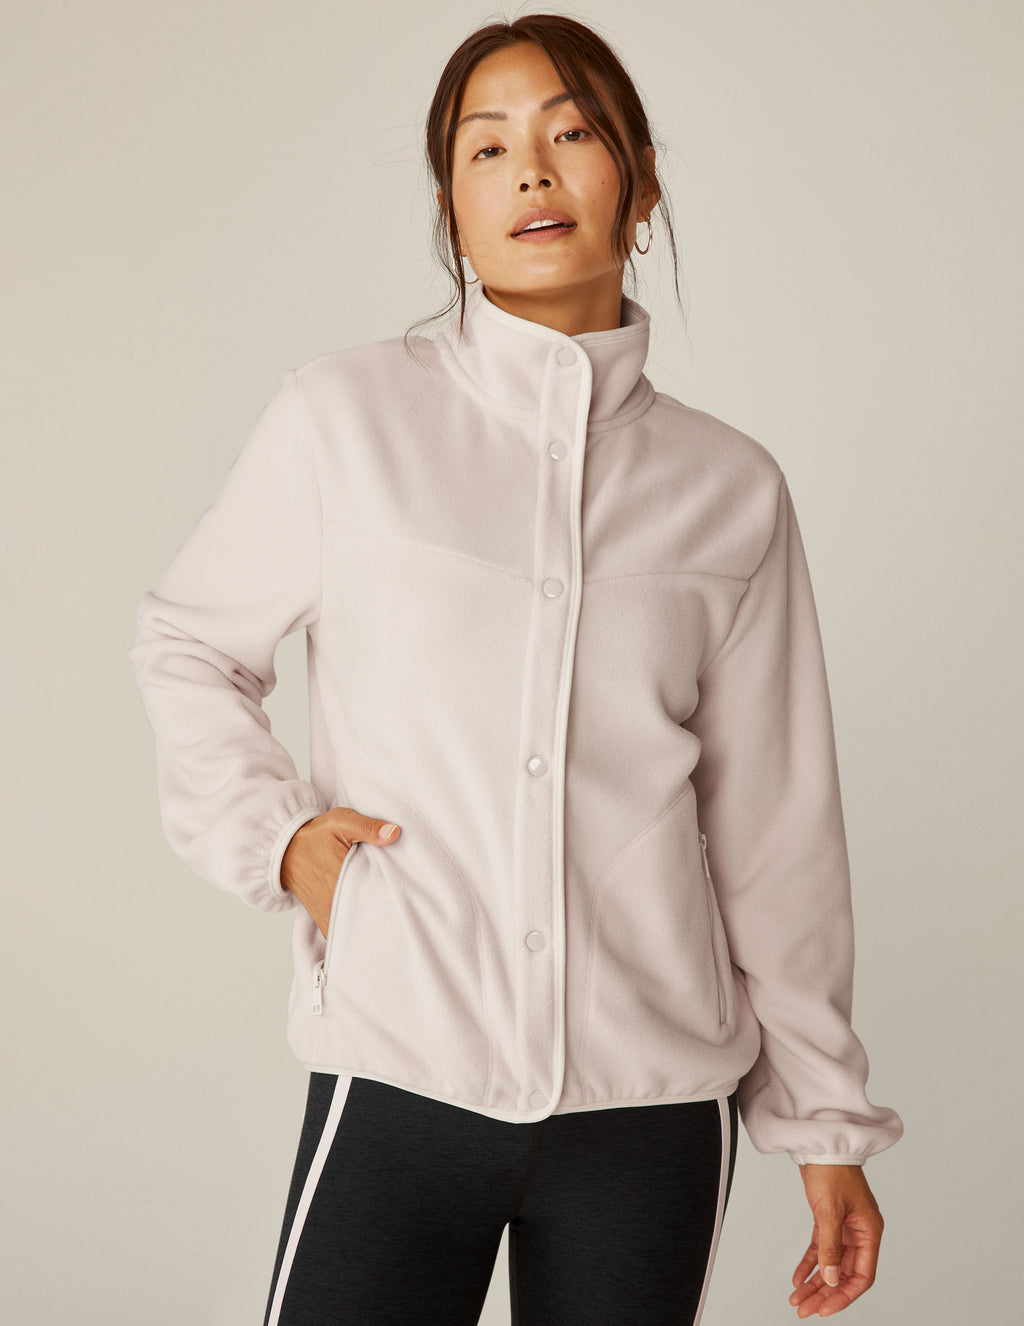 Tuff Veda Yoga Jackets on SALE 😍Funnel neck, long sleeves with